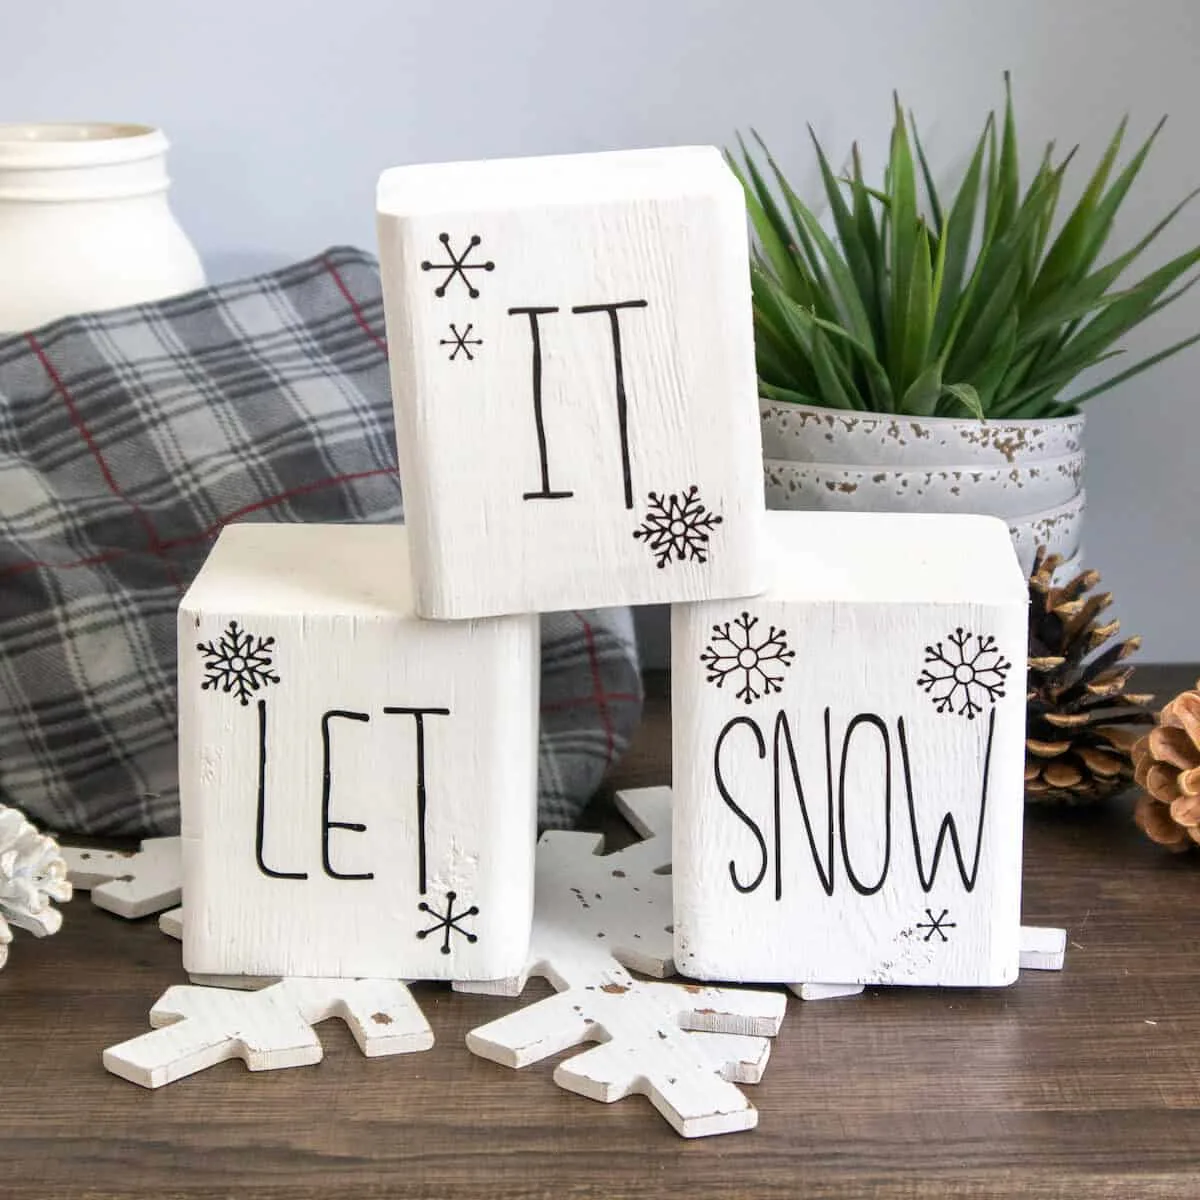 painted wood block Snowman word stencils on table